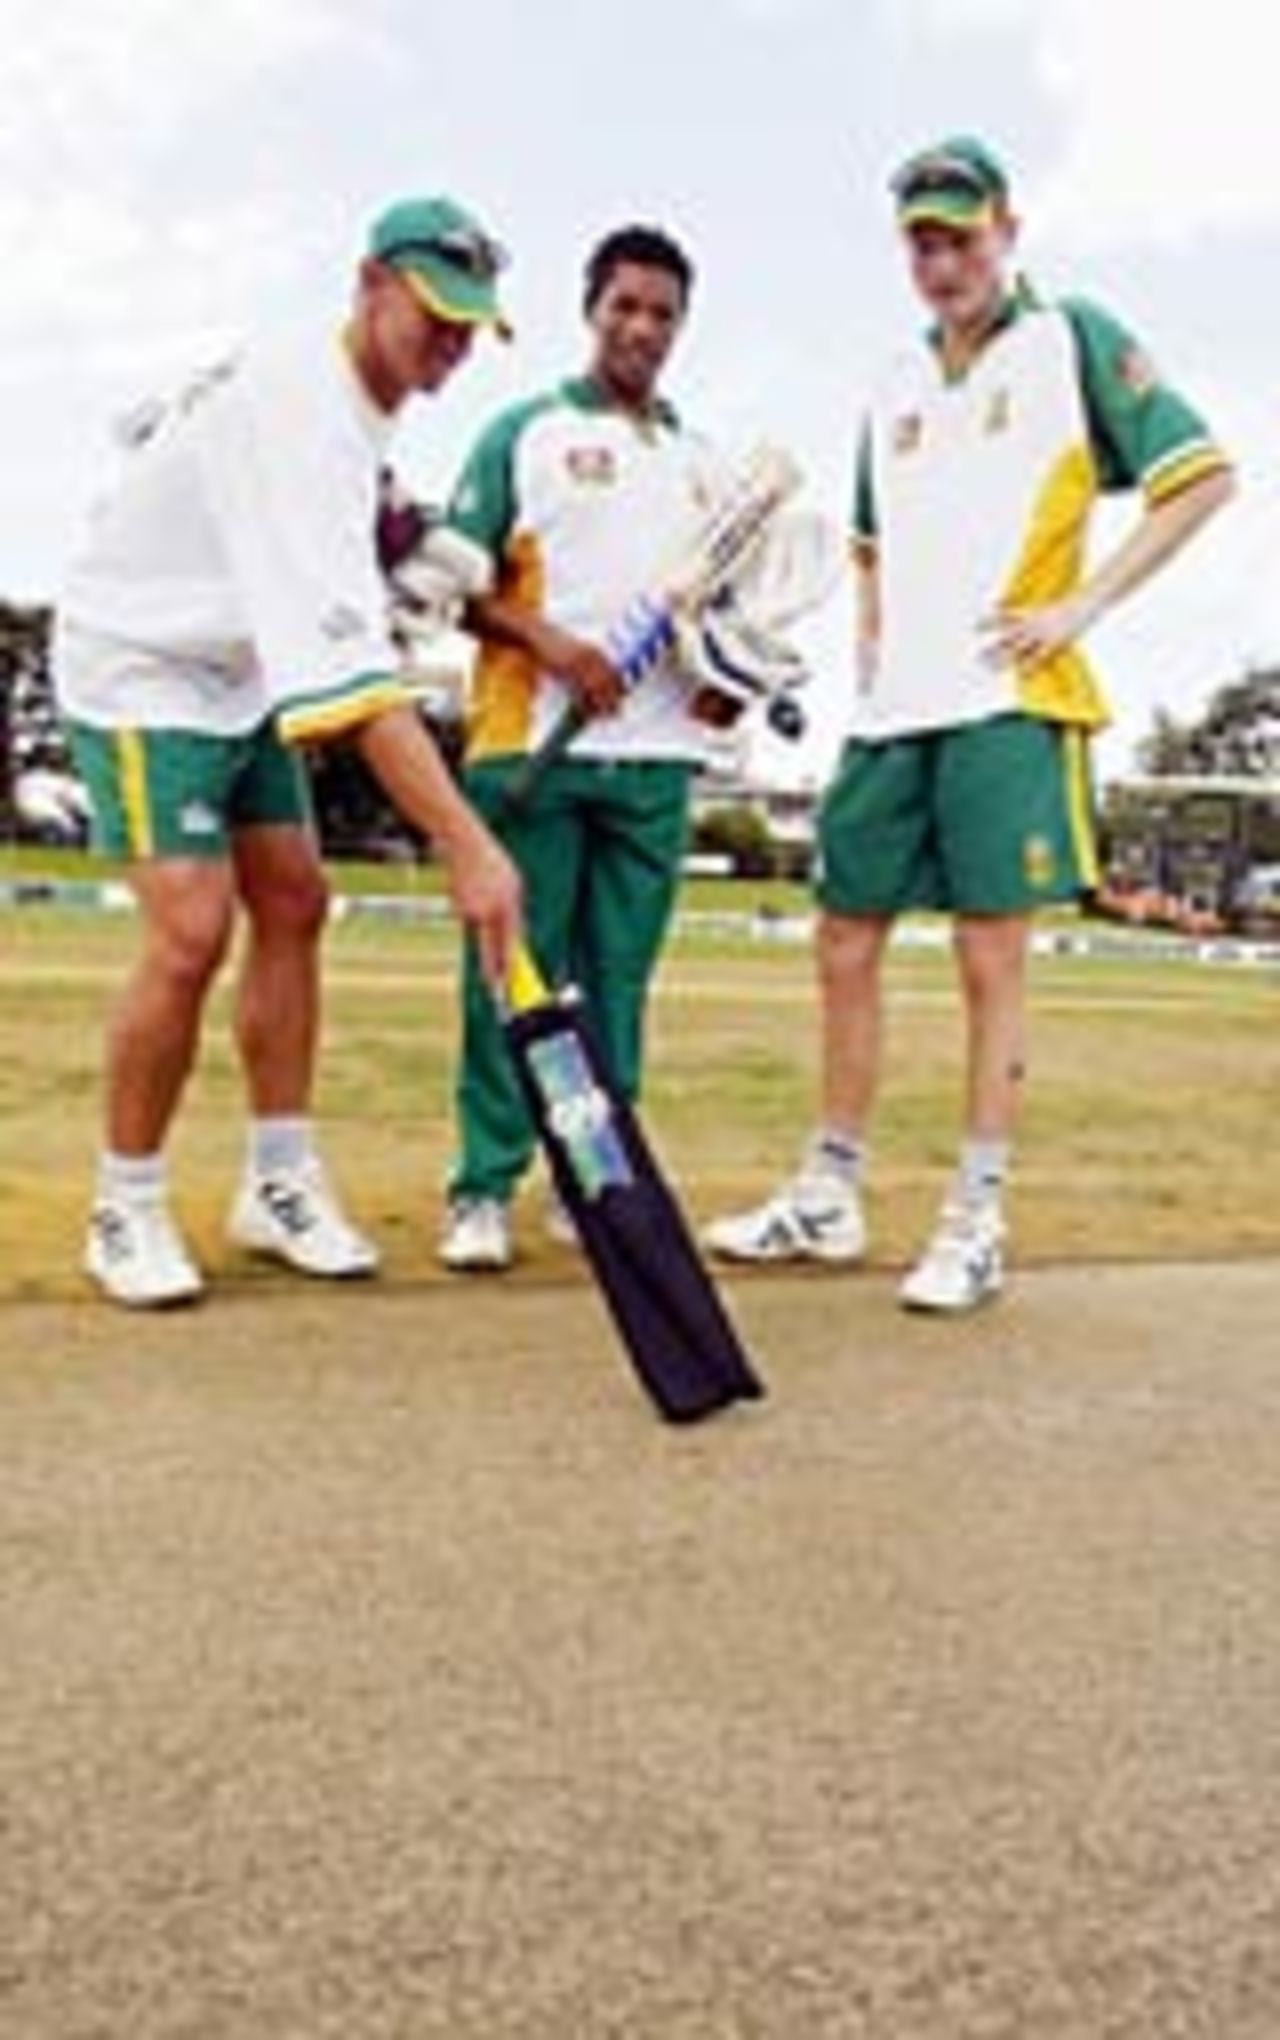 Andre Nel, Makhaya Ntini and David Terbrugge inspect the pitch ahead of the first Test, Hamilton, March 9, 2004